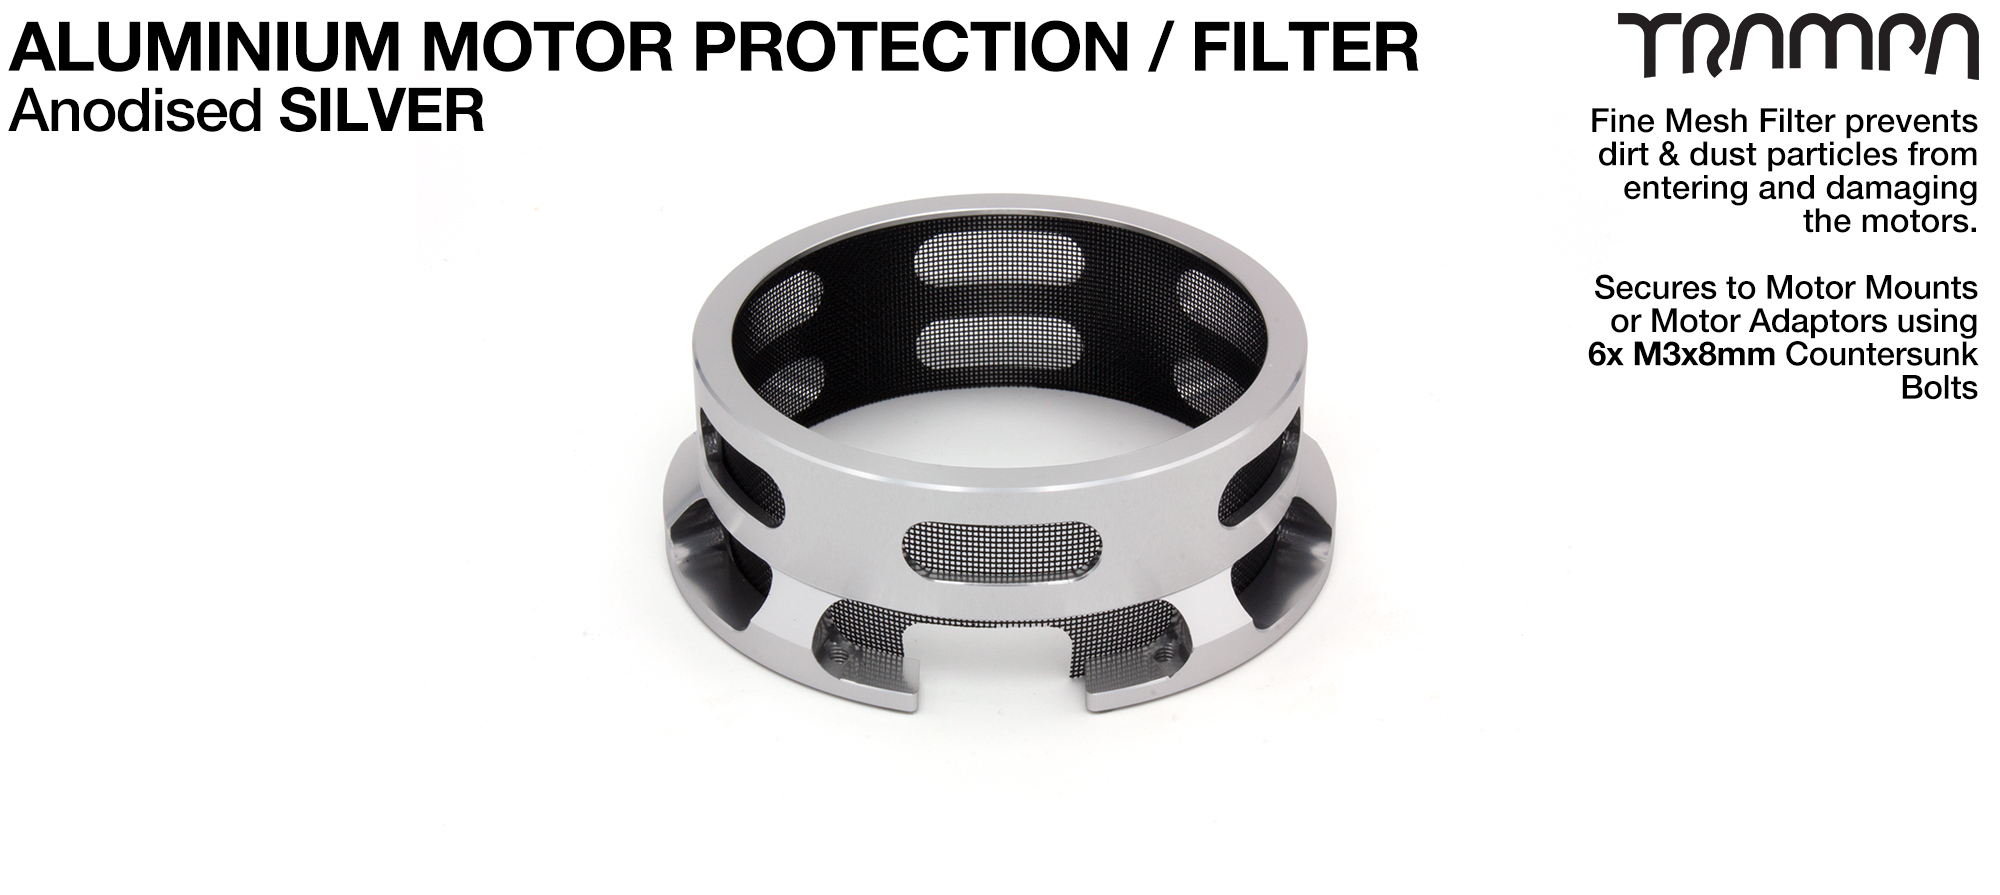 HALF CAGE Motor protection Housing - SILVER 